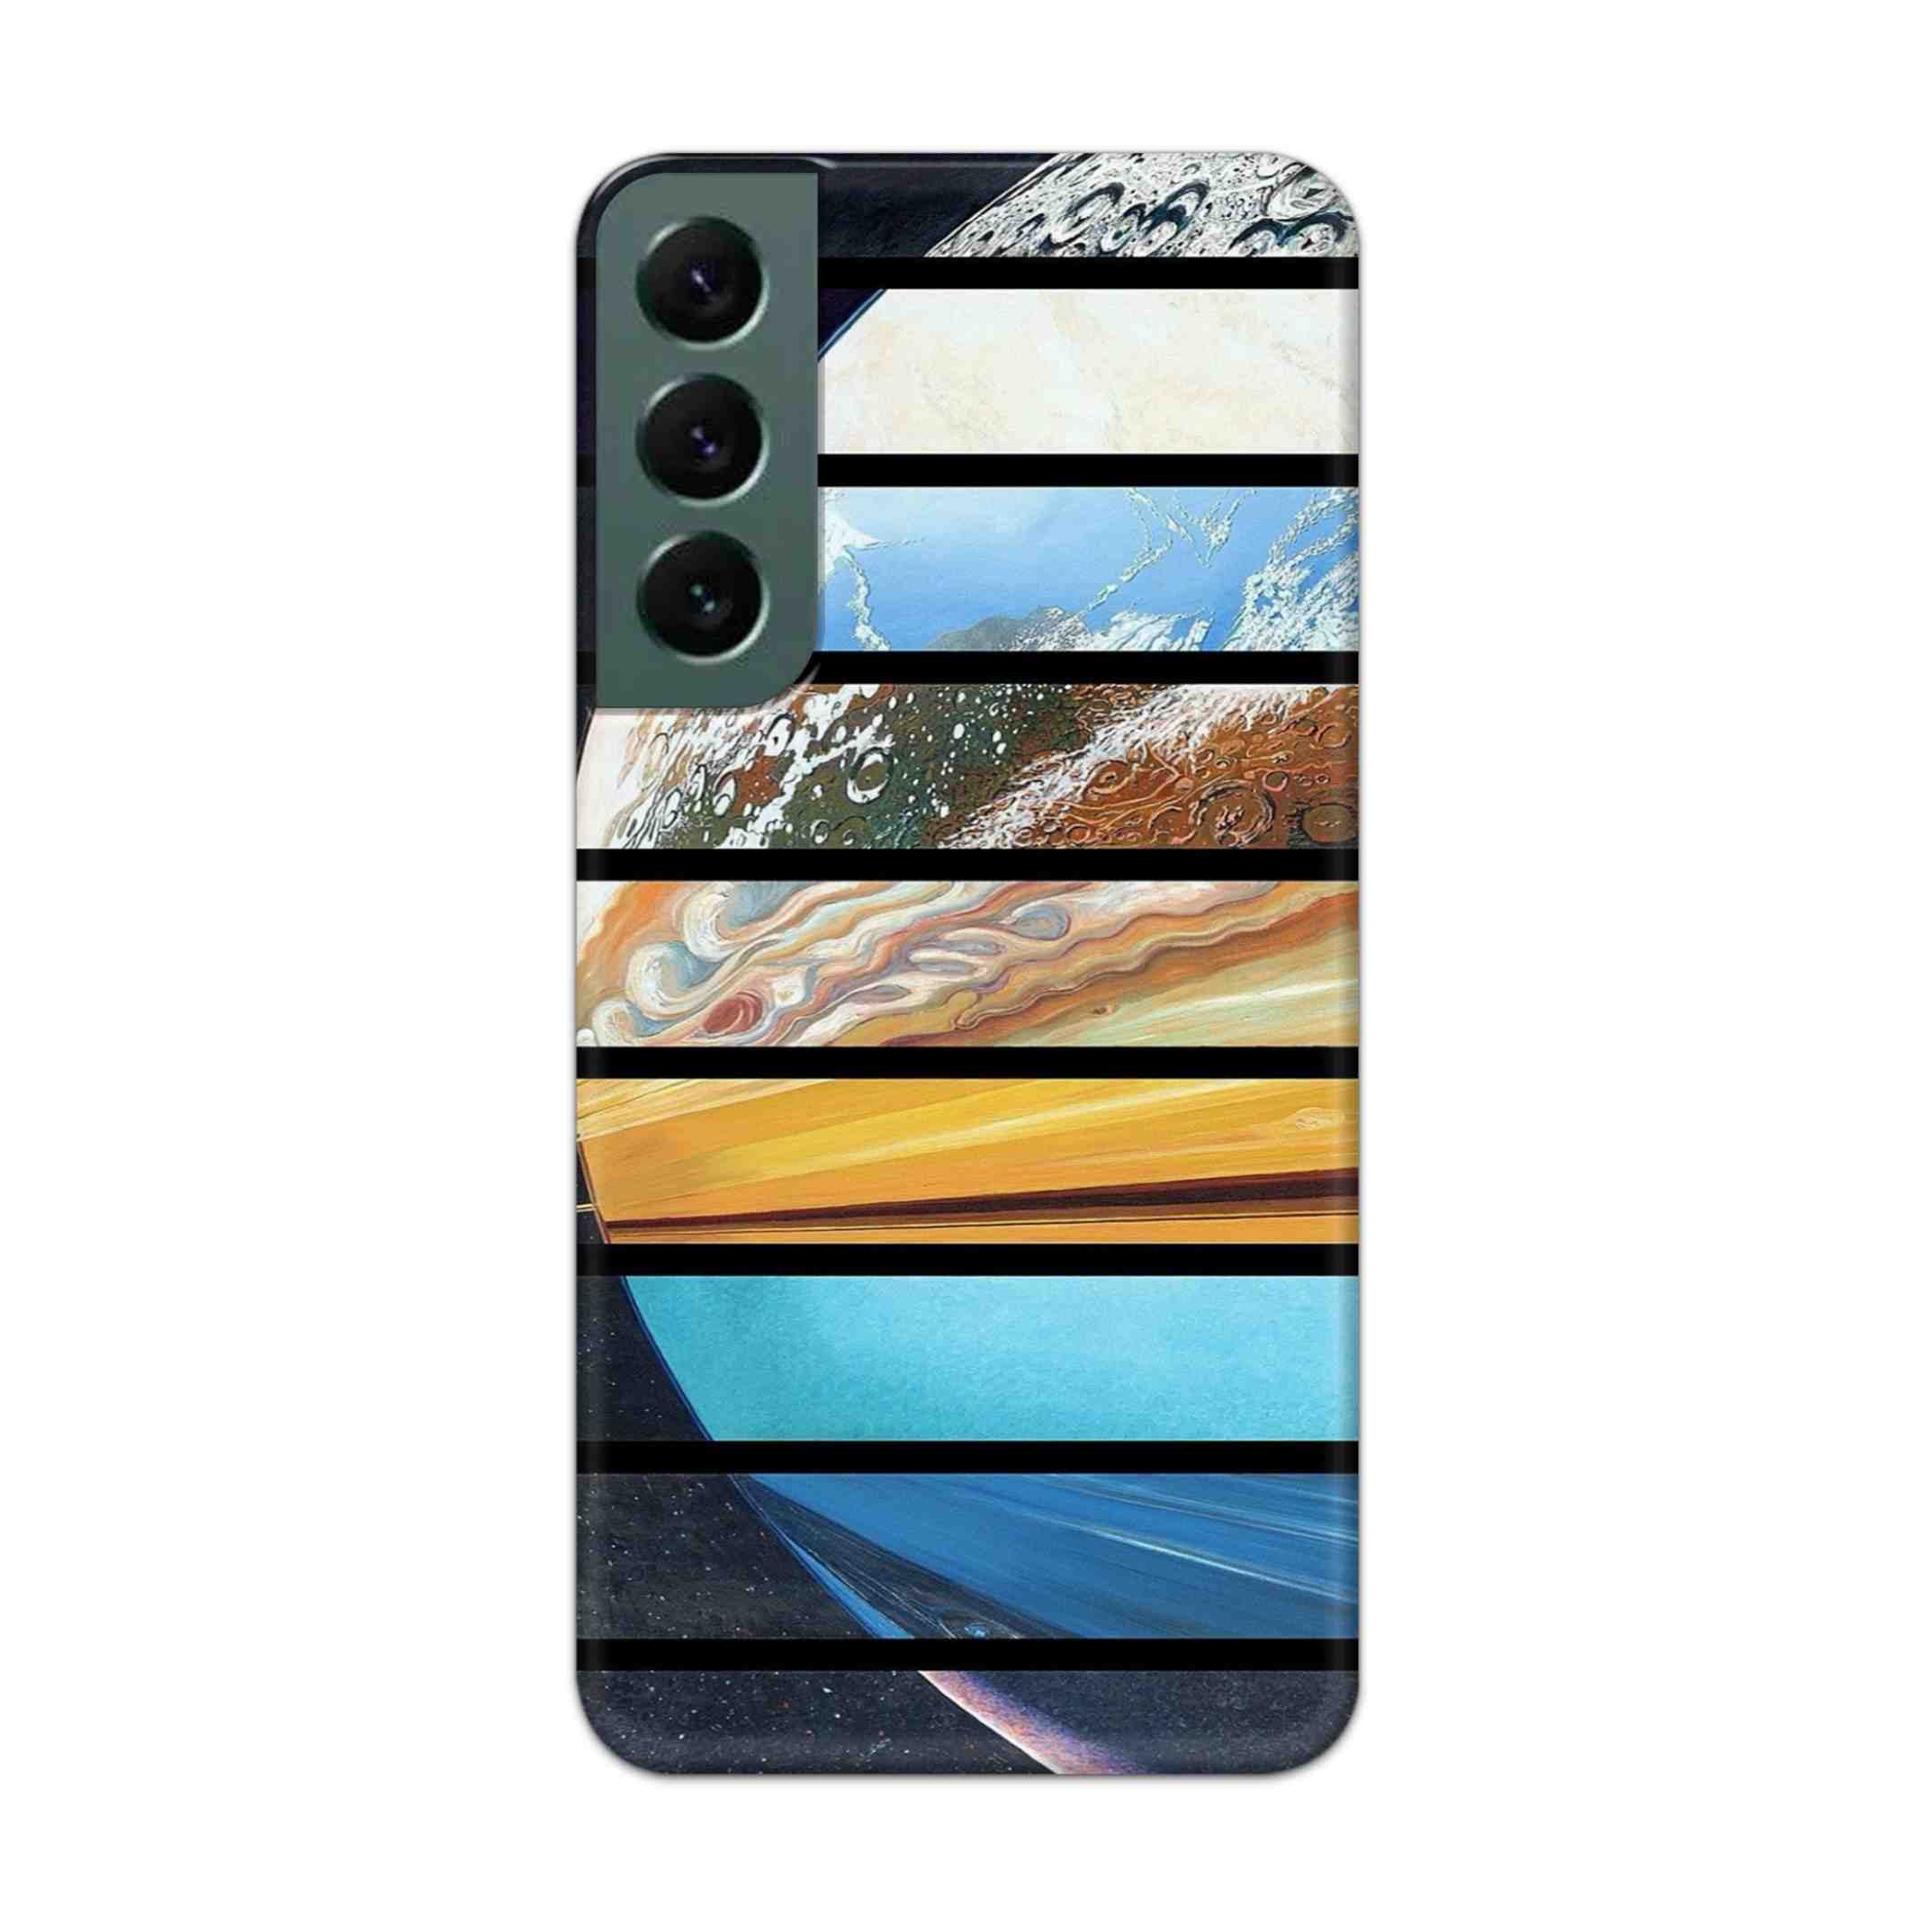 Buy Colourful Earth Hard Back Mobile Phone Case Cover For Samsung S22 Online